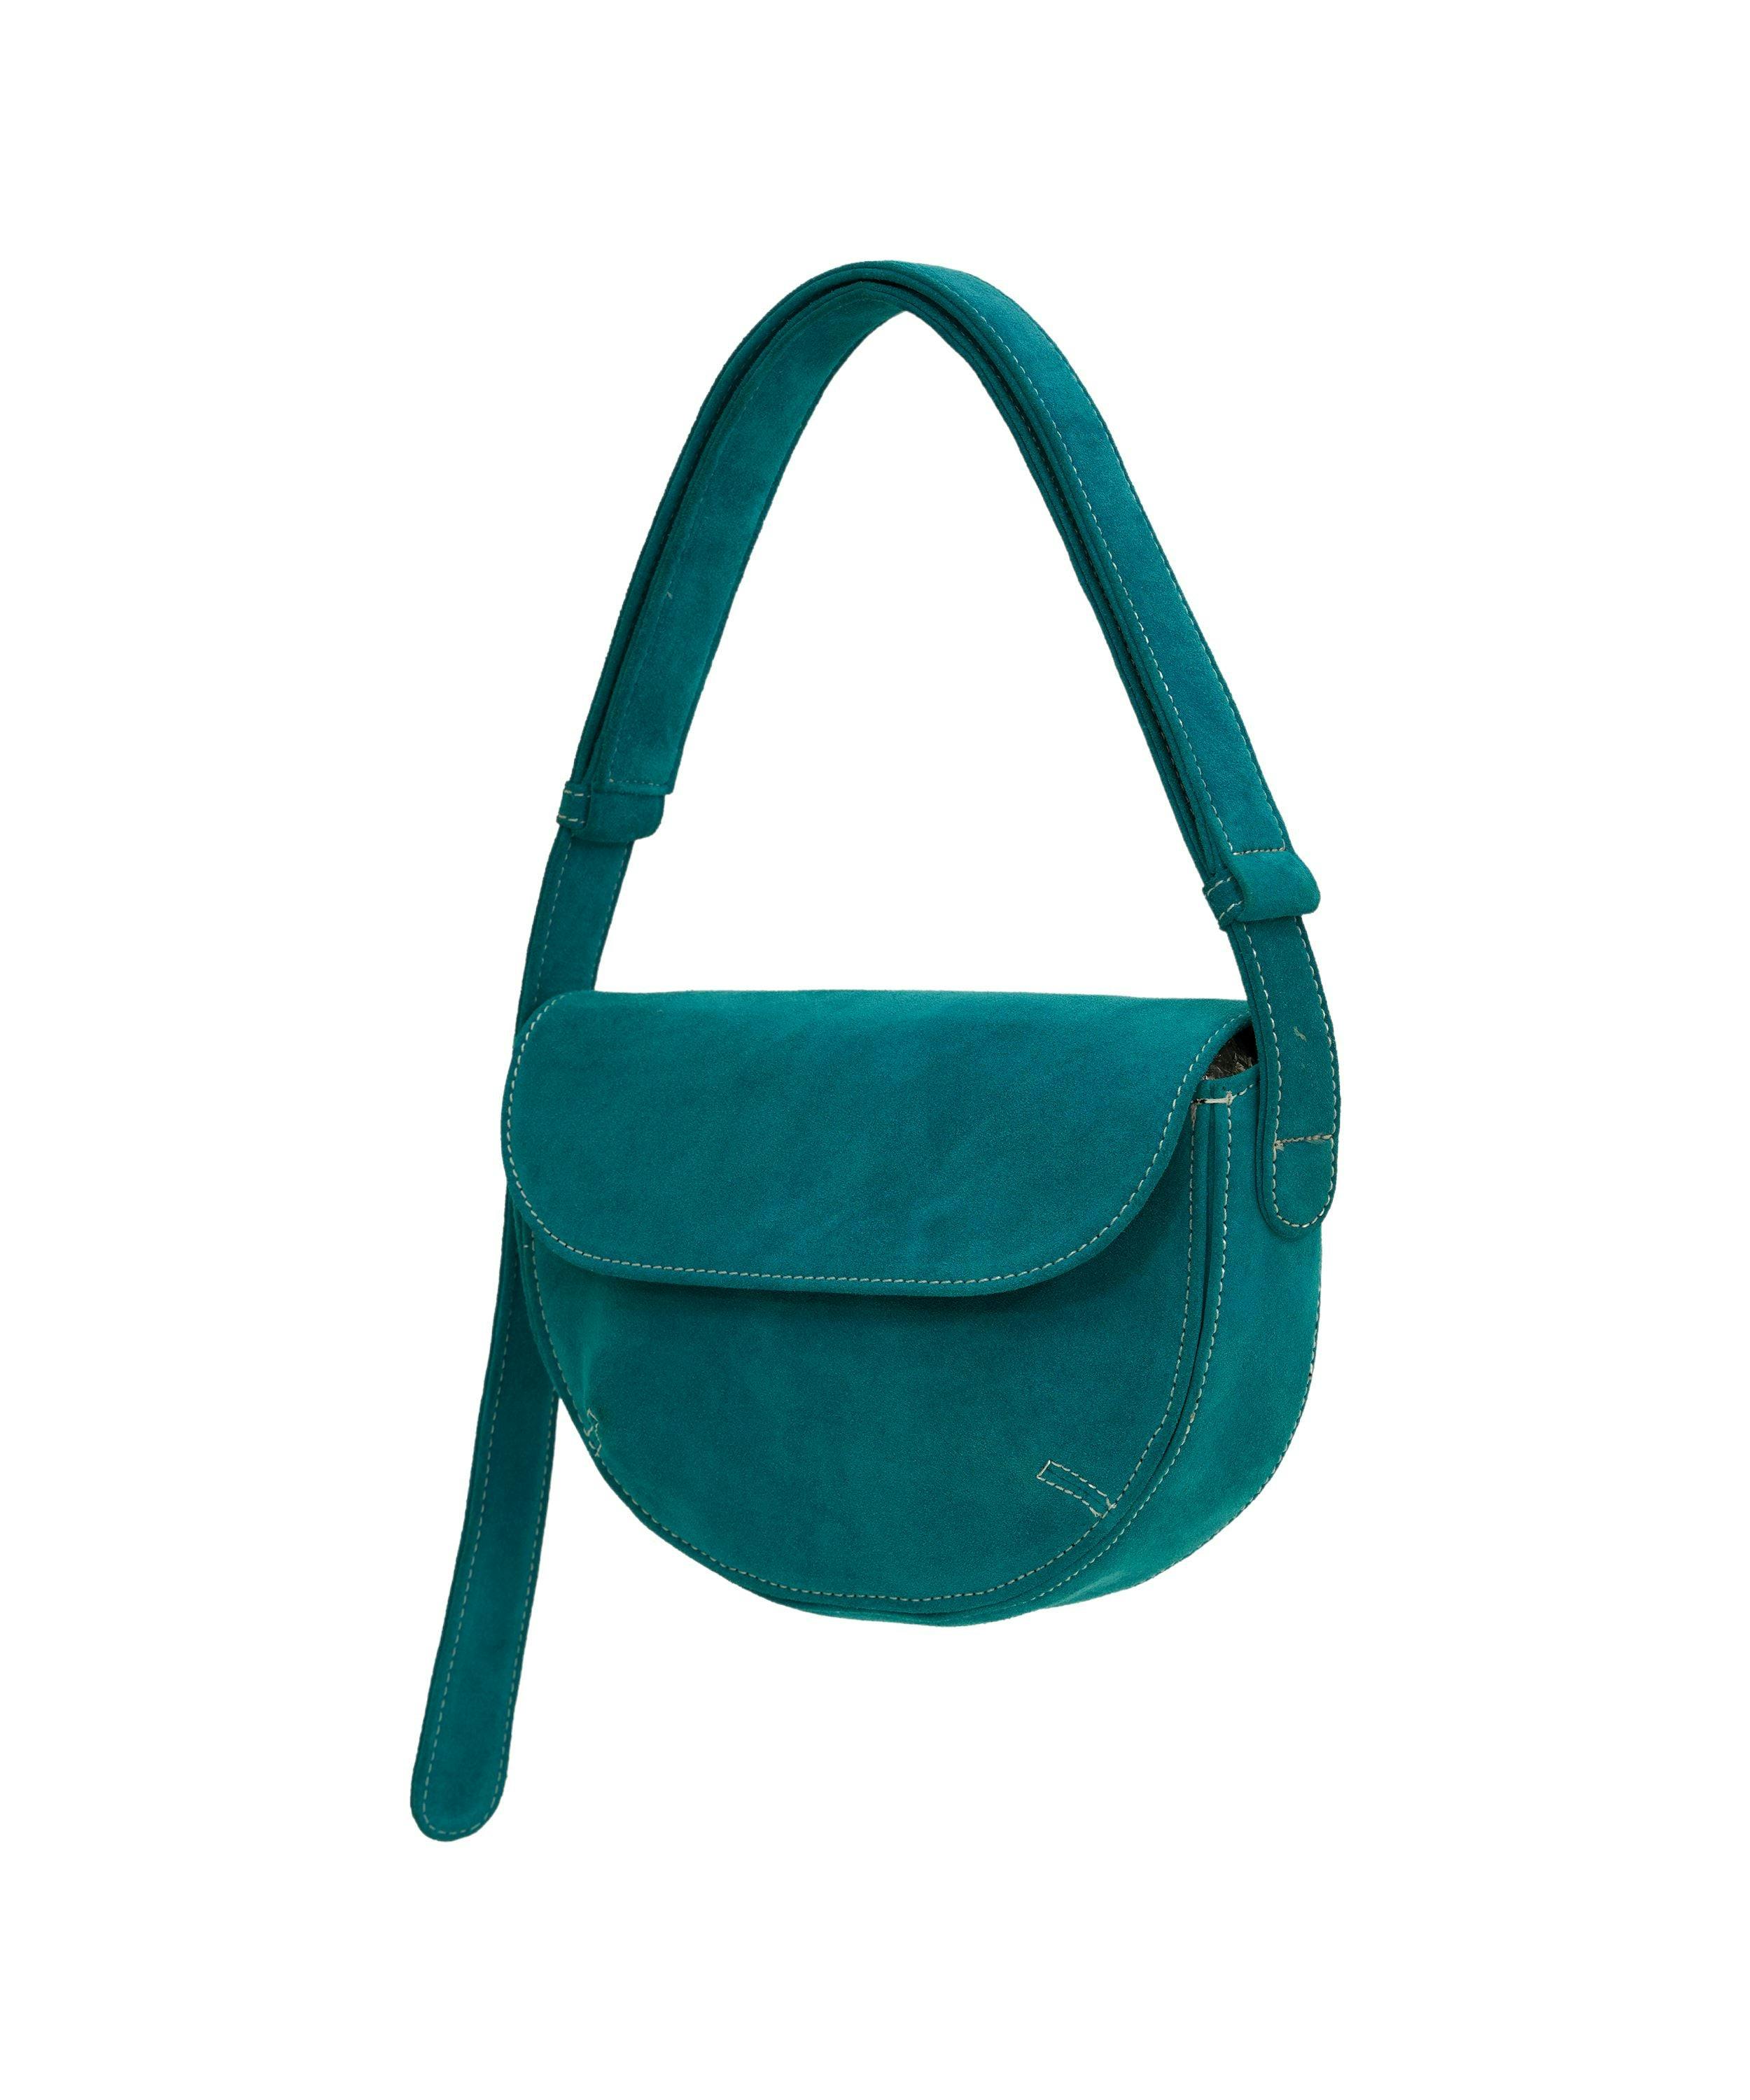 Billie Bag in Psalm, a product by Mistry 